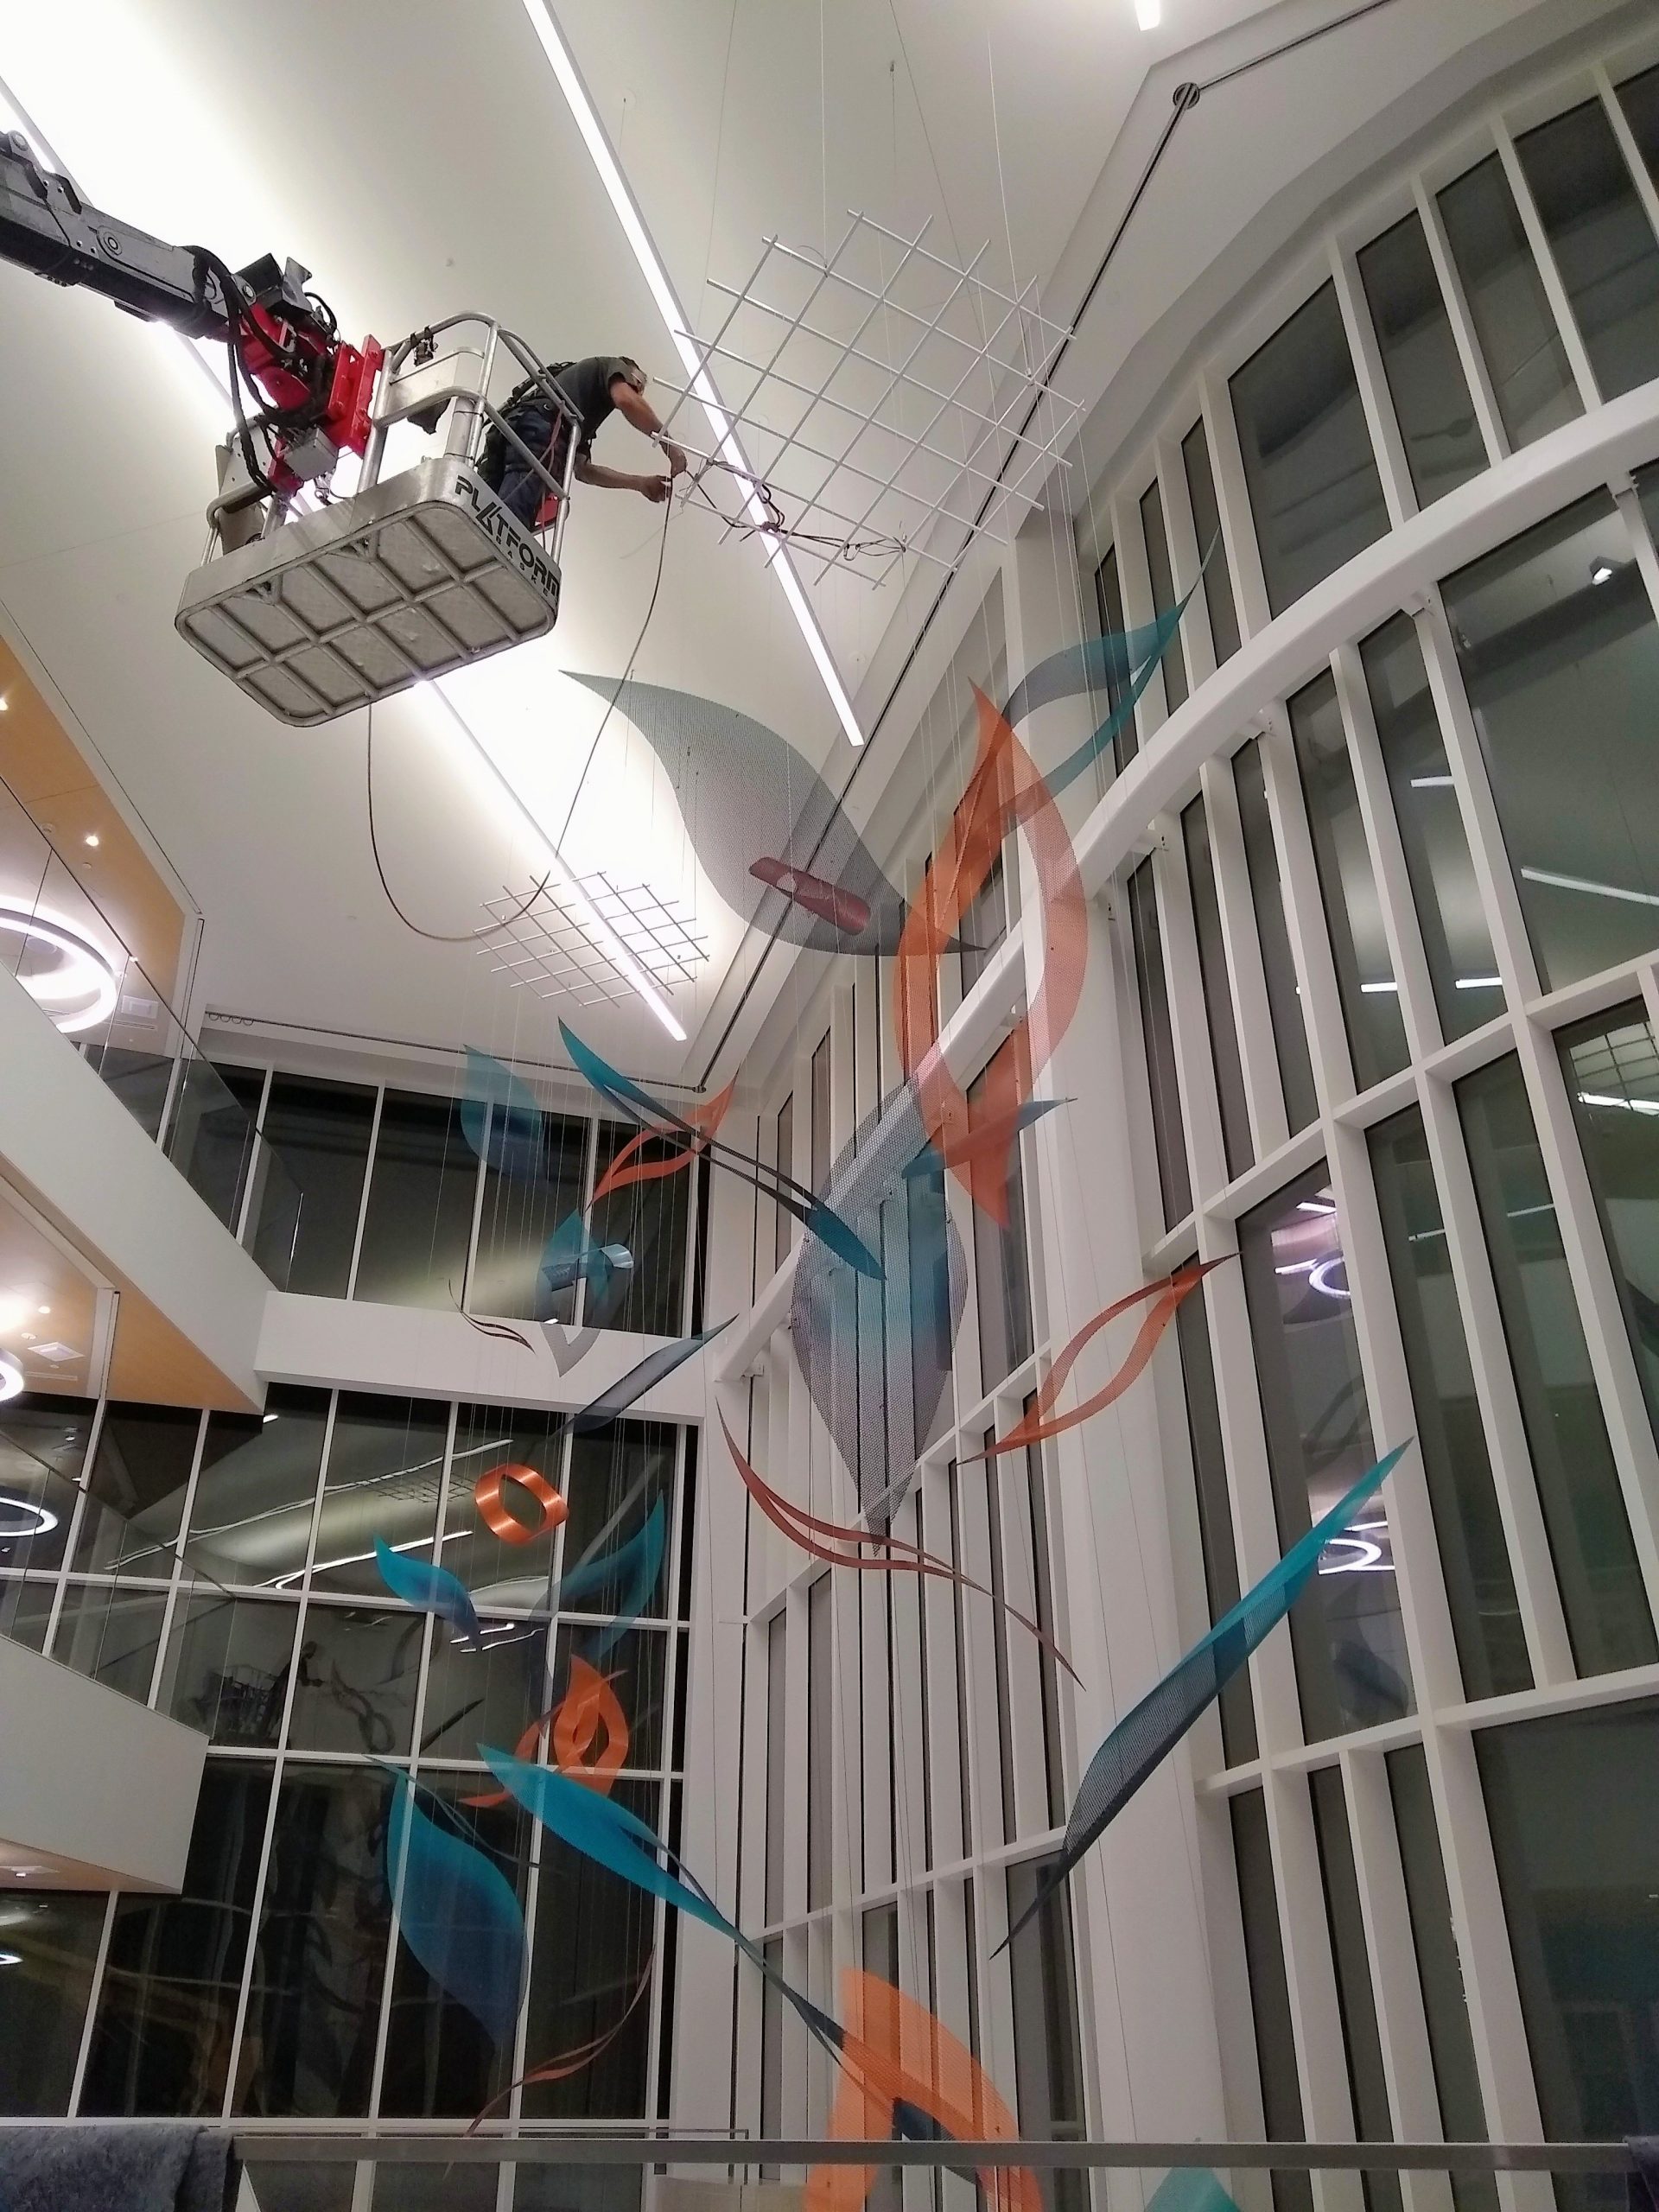 An art rigger in an aerial lift installs cables to a grid suspending the atrium sculpture.